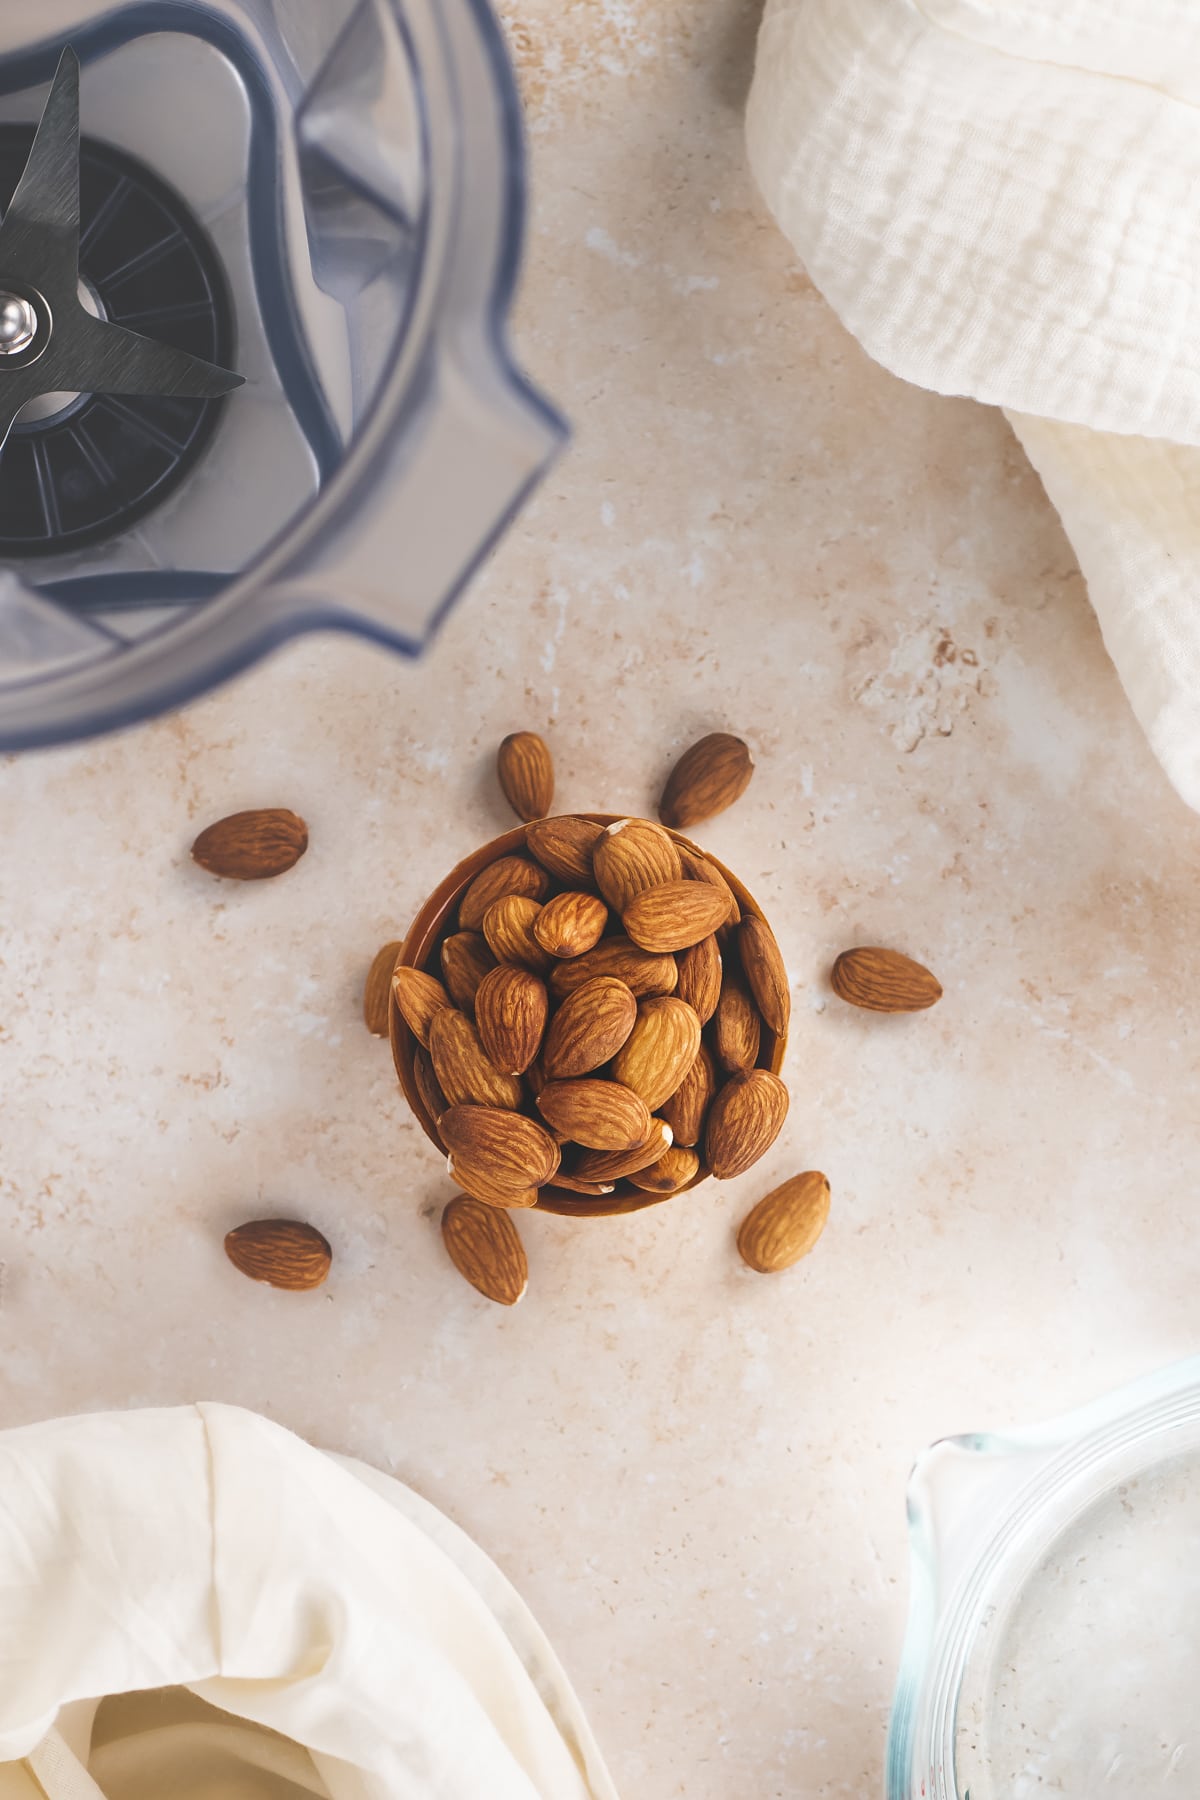 An overflowing bowl of almonds surrounded by a blender jug, bowl and nut milk bag.